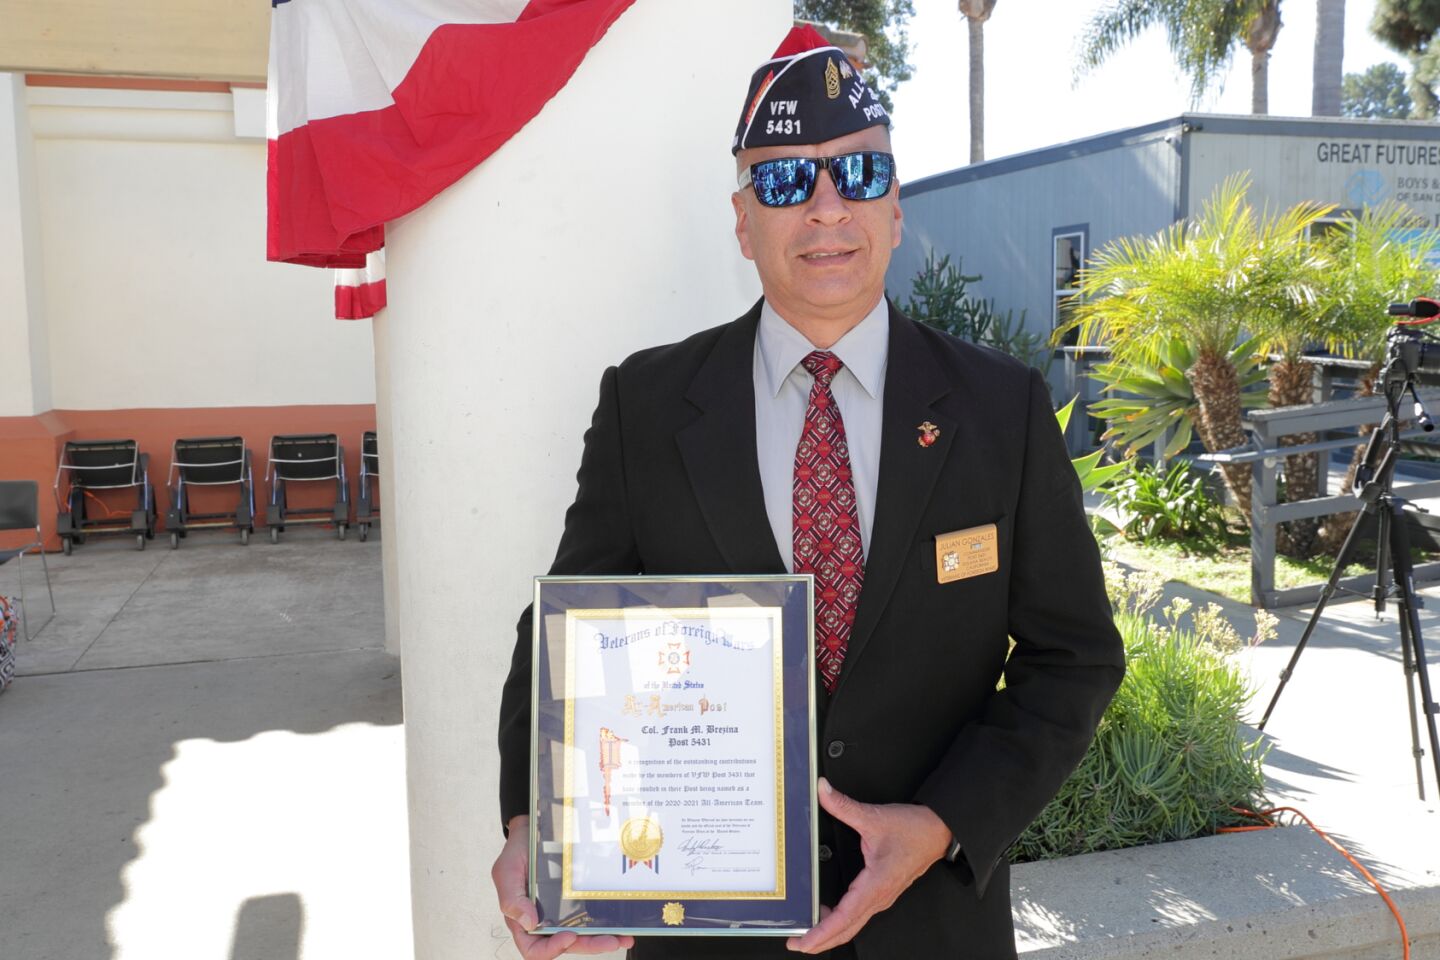 VFW Post Commander Julian Gonzales holds a plaque from the VFW that recognizes Post 5431 as an All-American Post